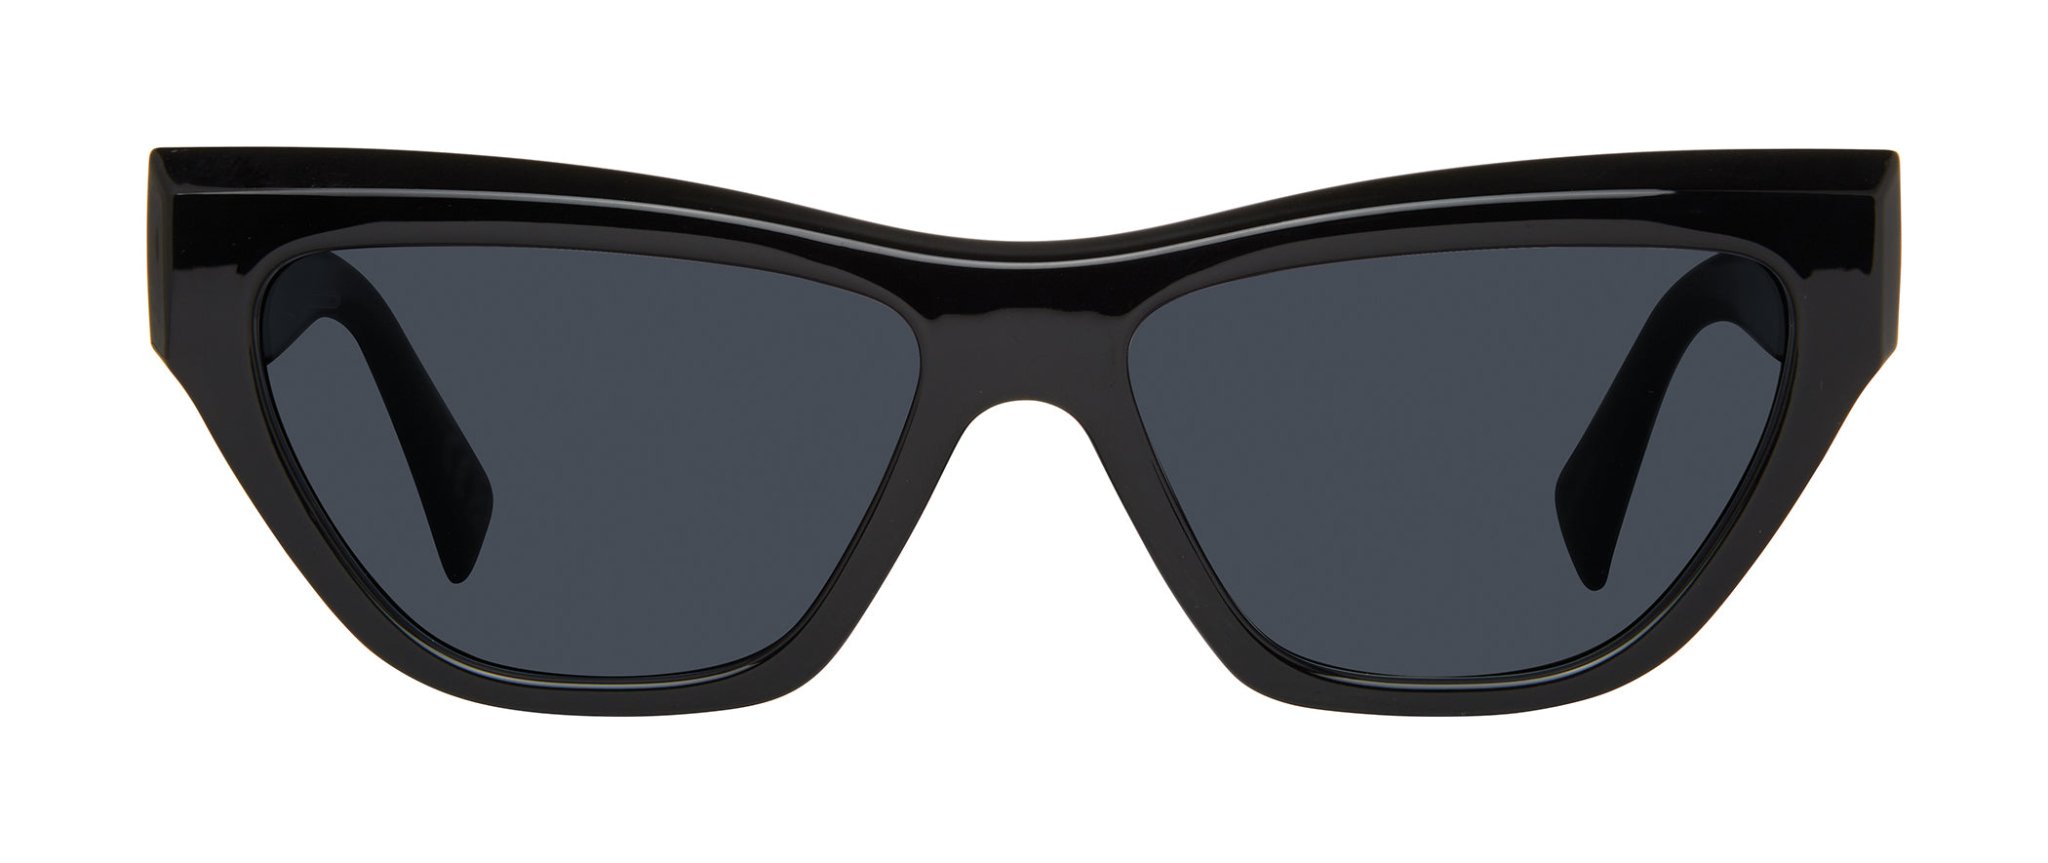 Privado Verraux - Black - Handcrafted Luxury Sunglass - UV400 Protection & Polarized, Scratch-Resistant Lenses